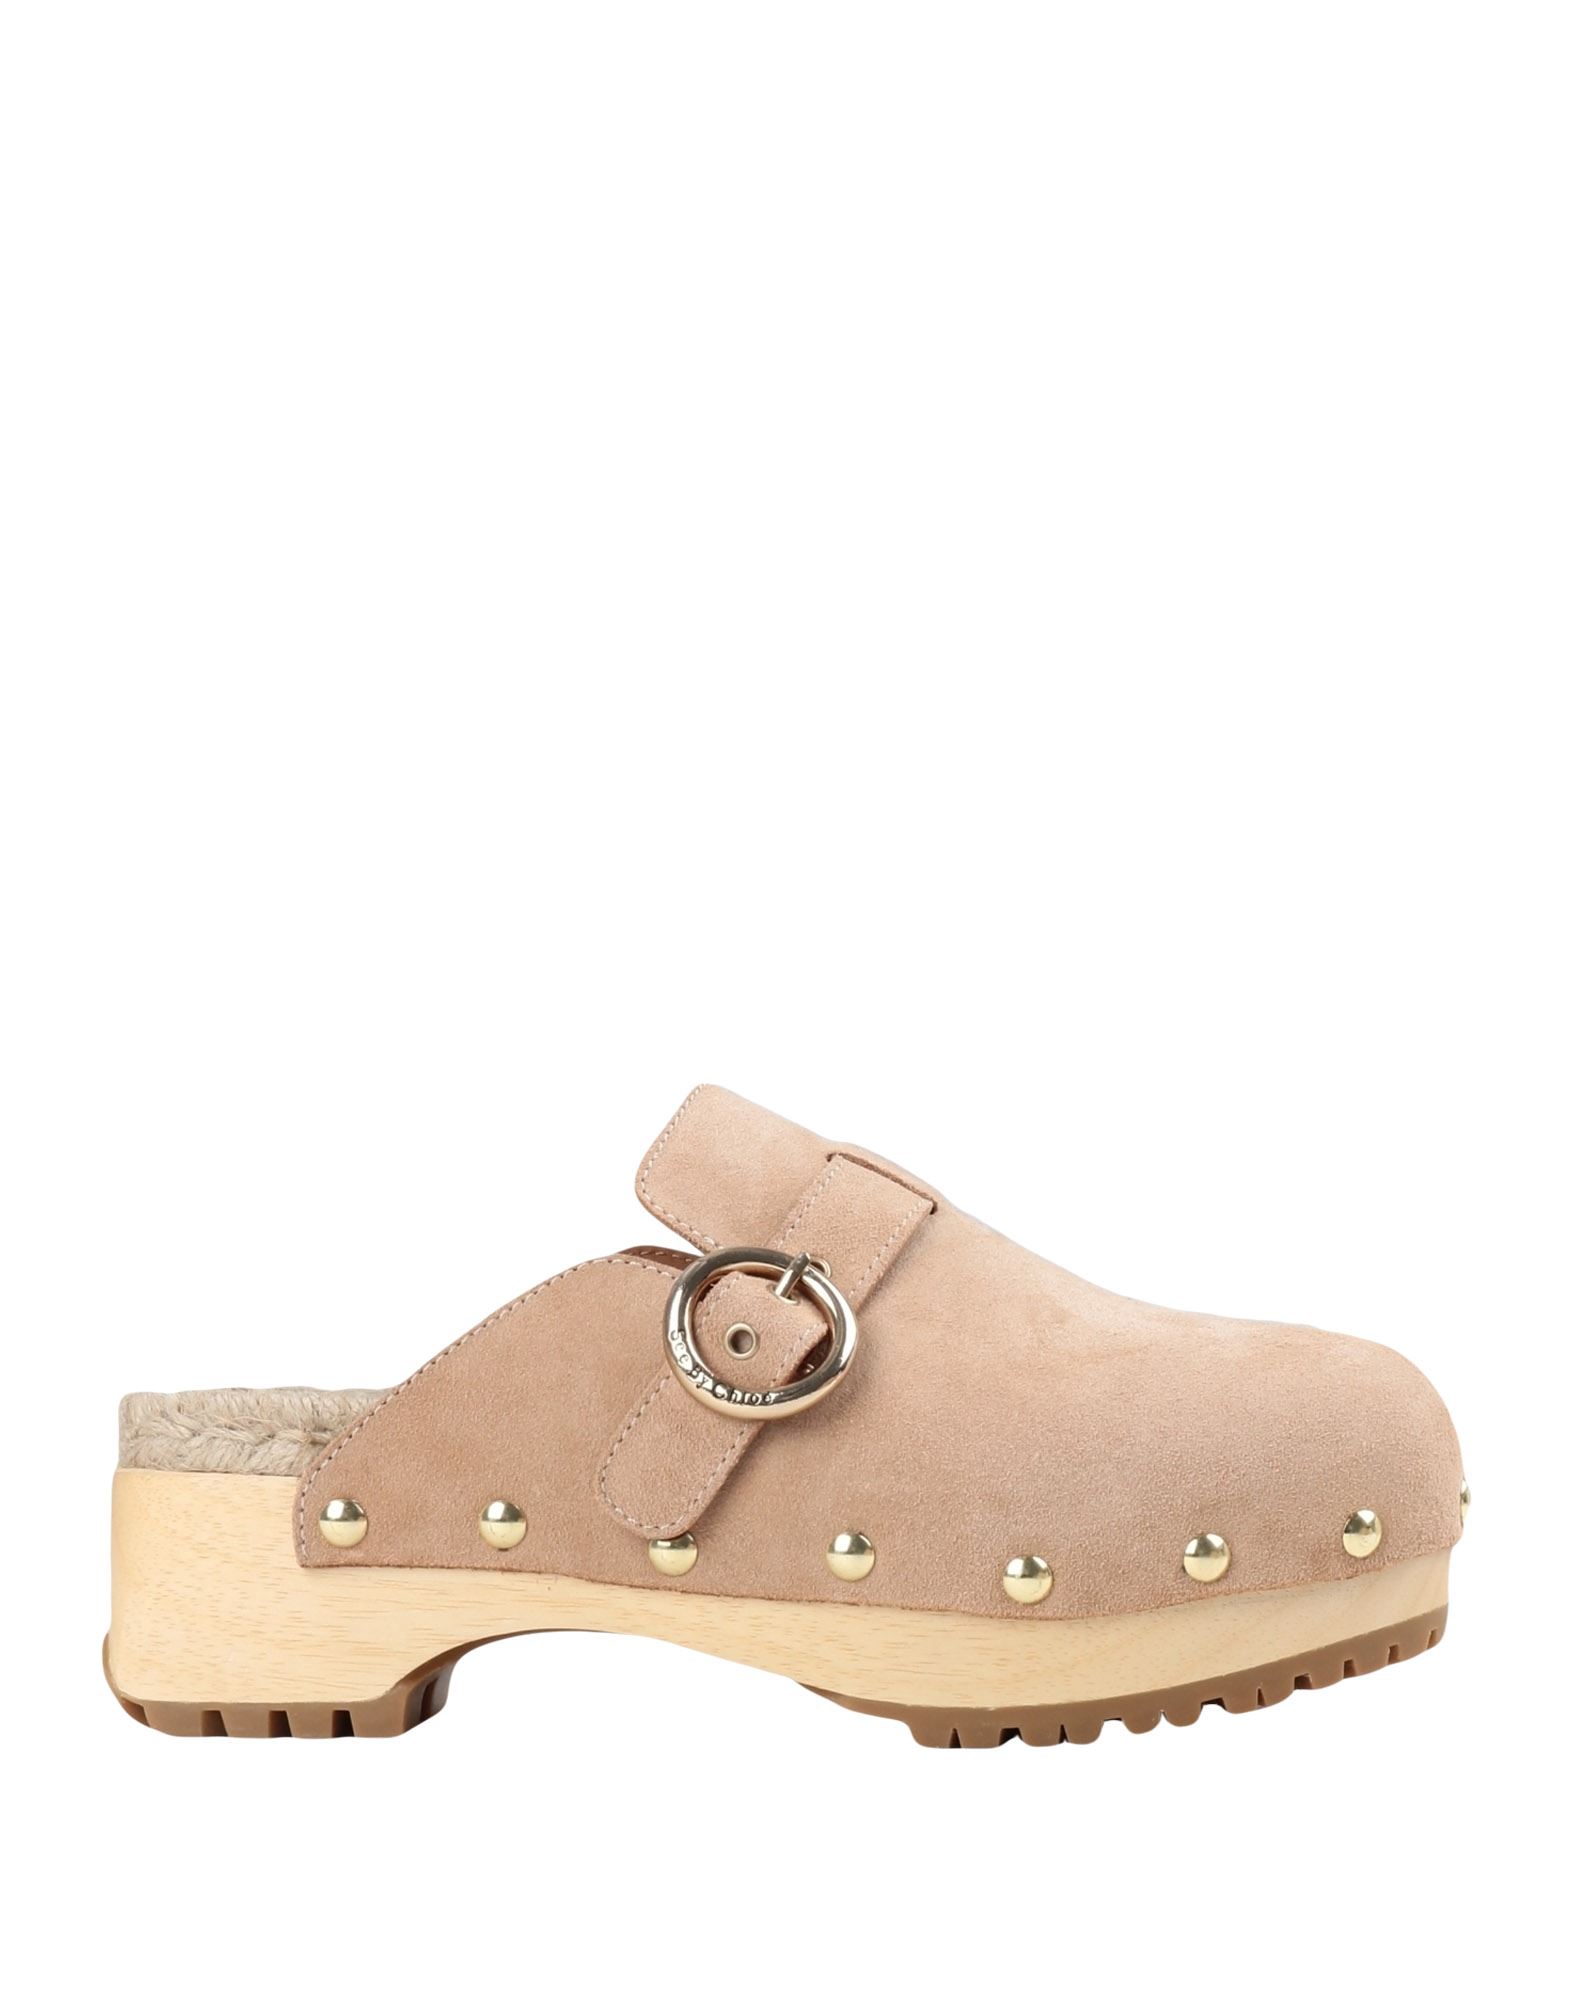 SEE BY CHLOÉ Mules & Clogs Damen Sand von SEE BY CHLOÉ